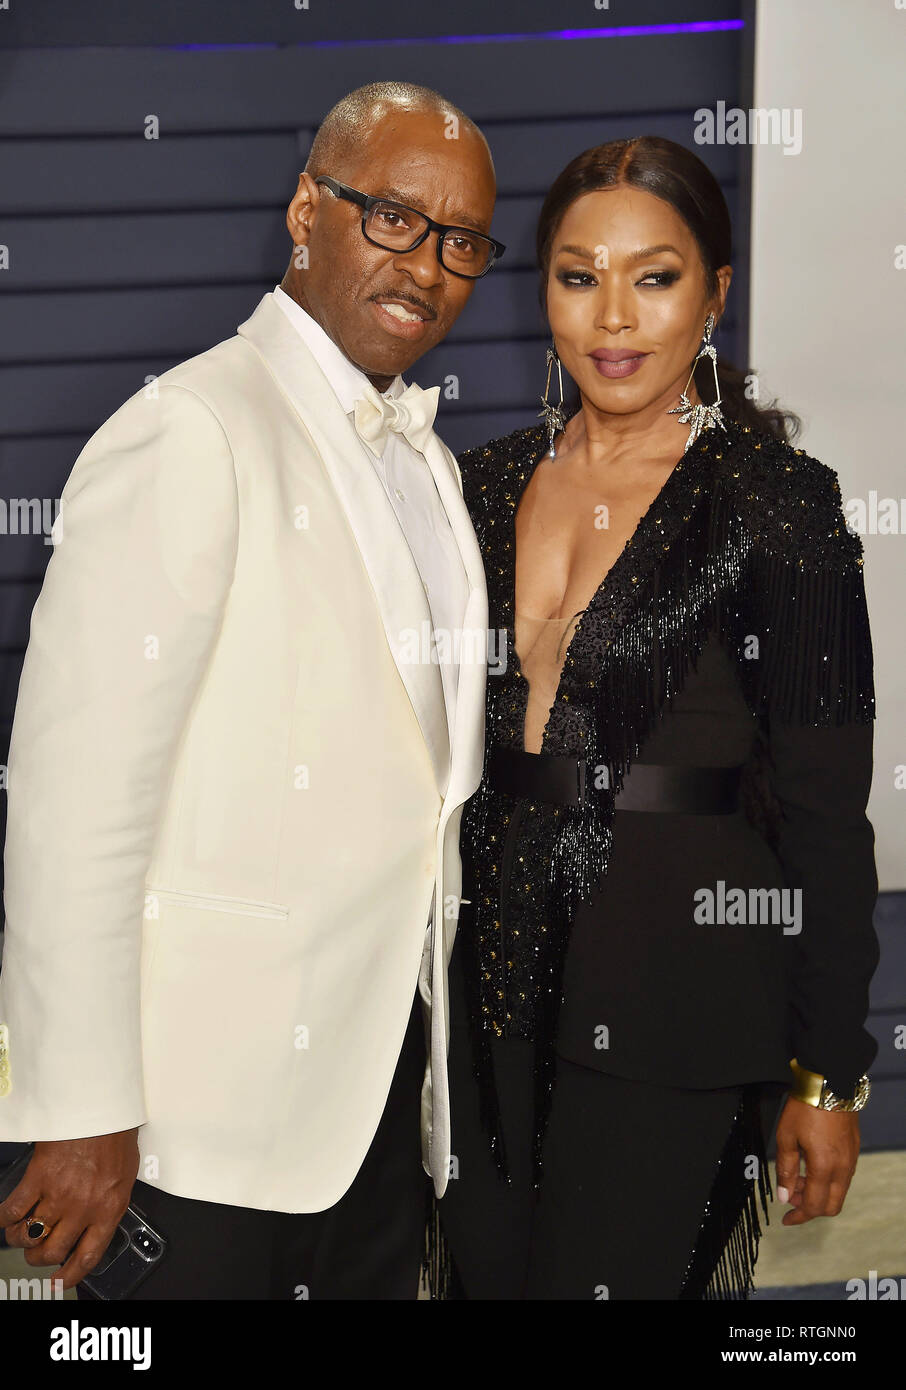 BEVERLY HILLS, CA - FEBRUARY 24: Courtney B. Vance (L) and Angela Bassett attend the 2019 Vanity Fair Oscar Party hosted by Radhika Jones at Wallis An Stock Photo